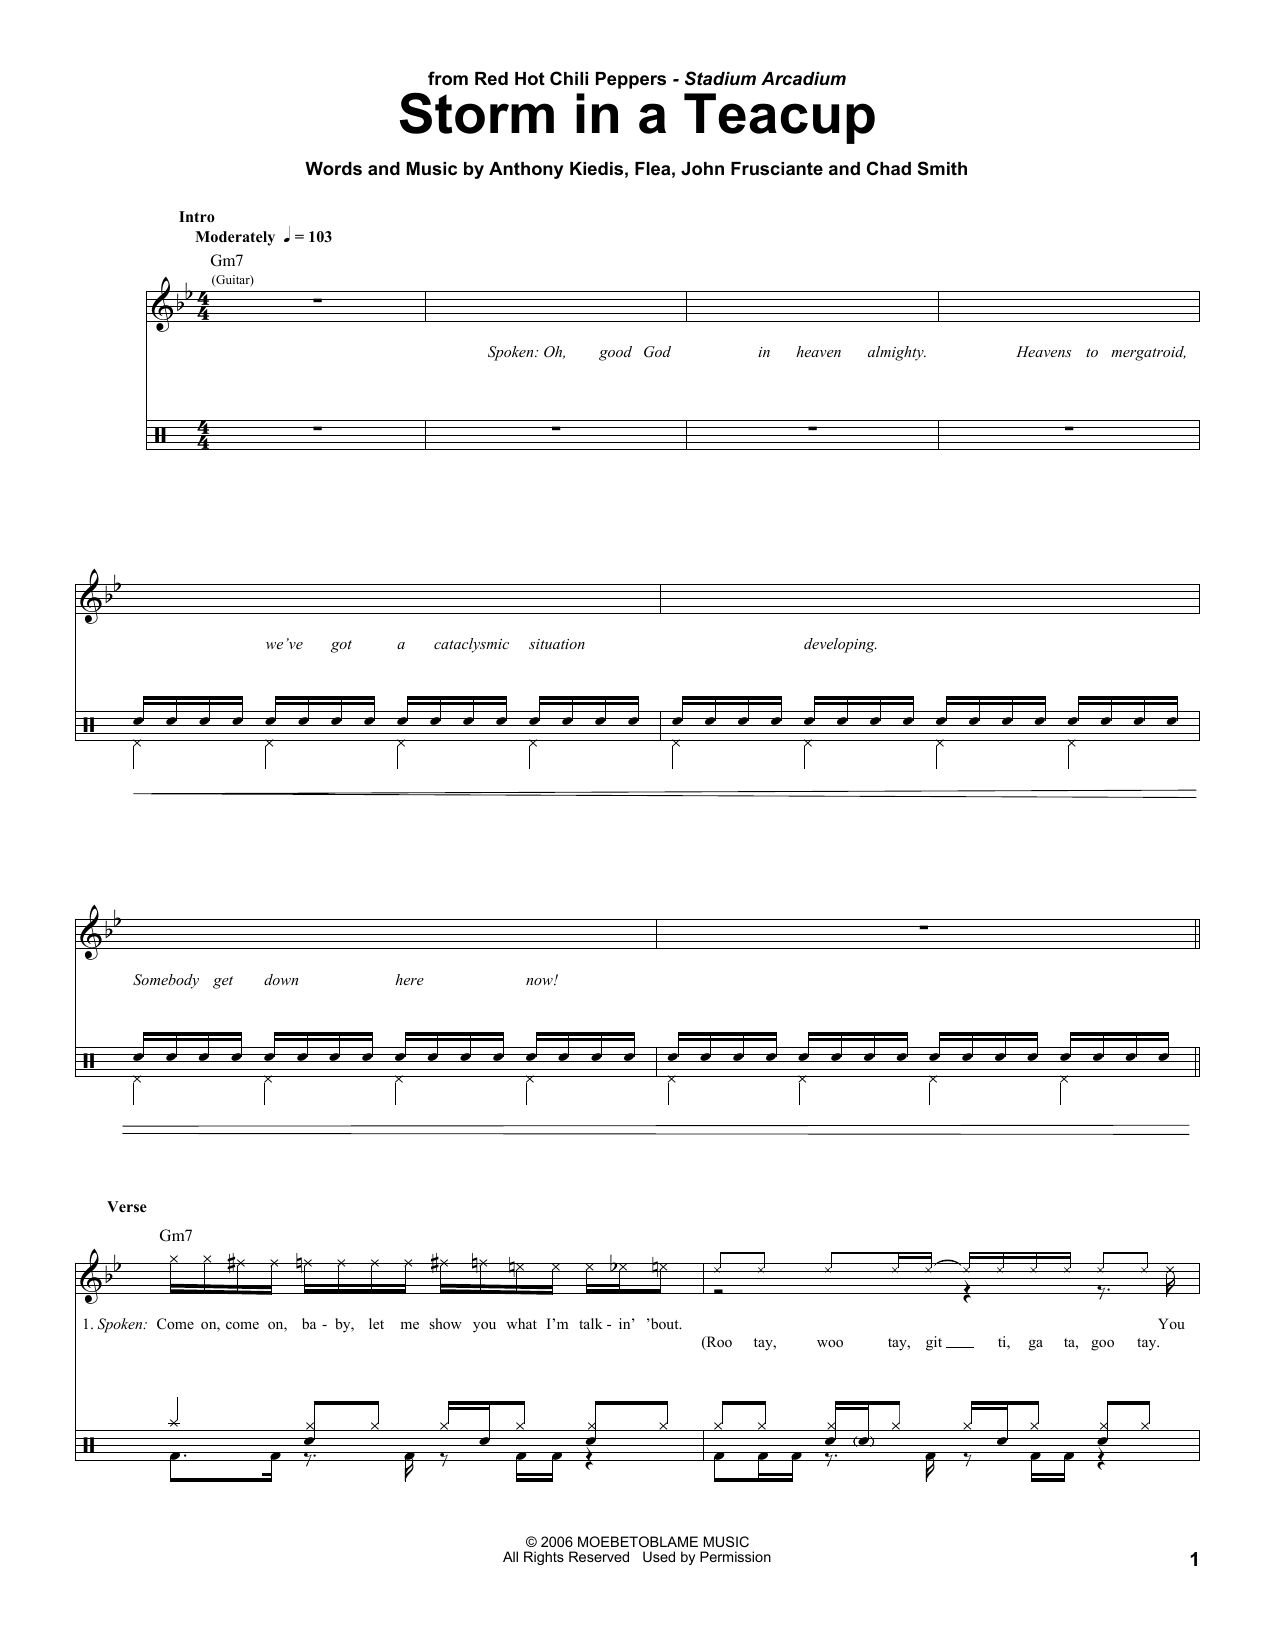 Download Red Hot Chili Peppers Storm In A Teacup Sheet Music